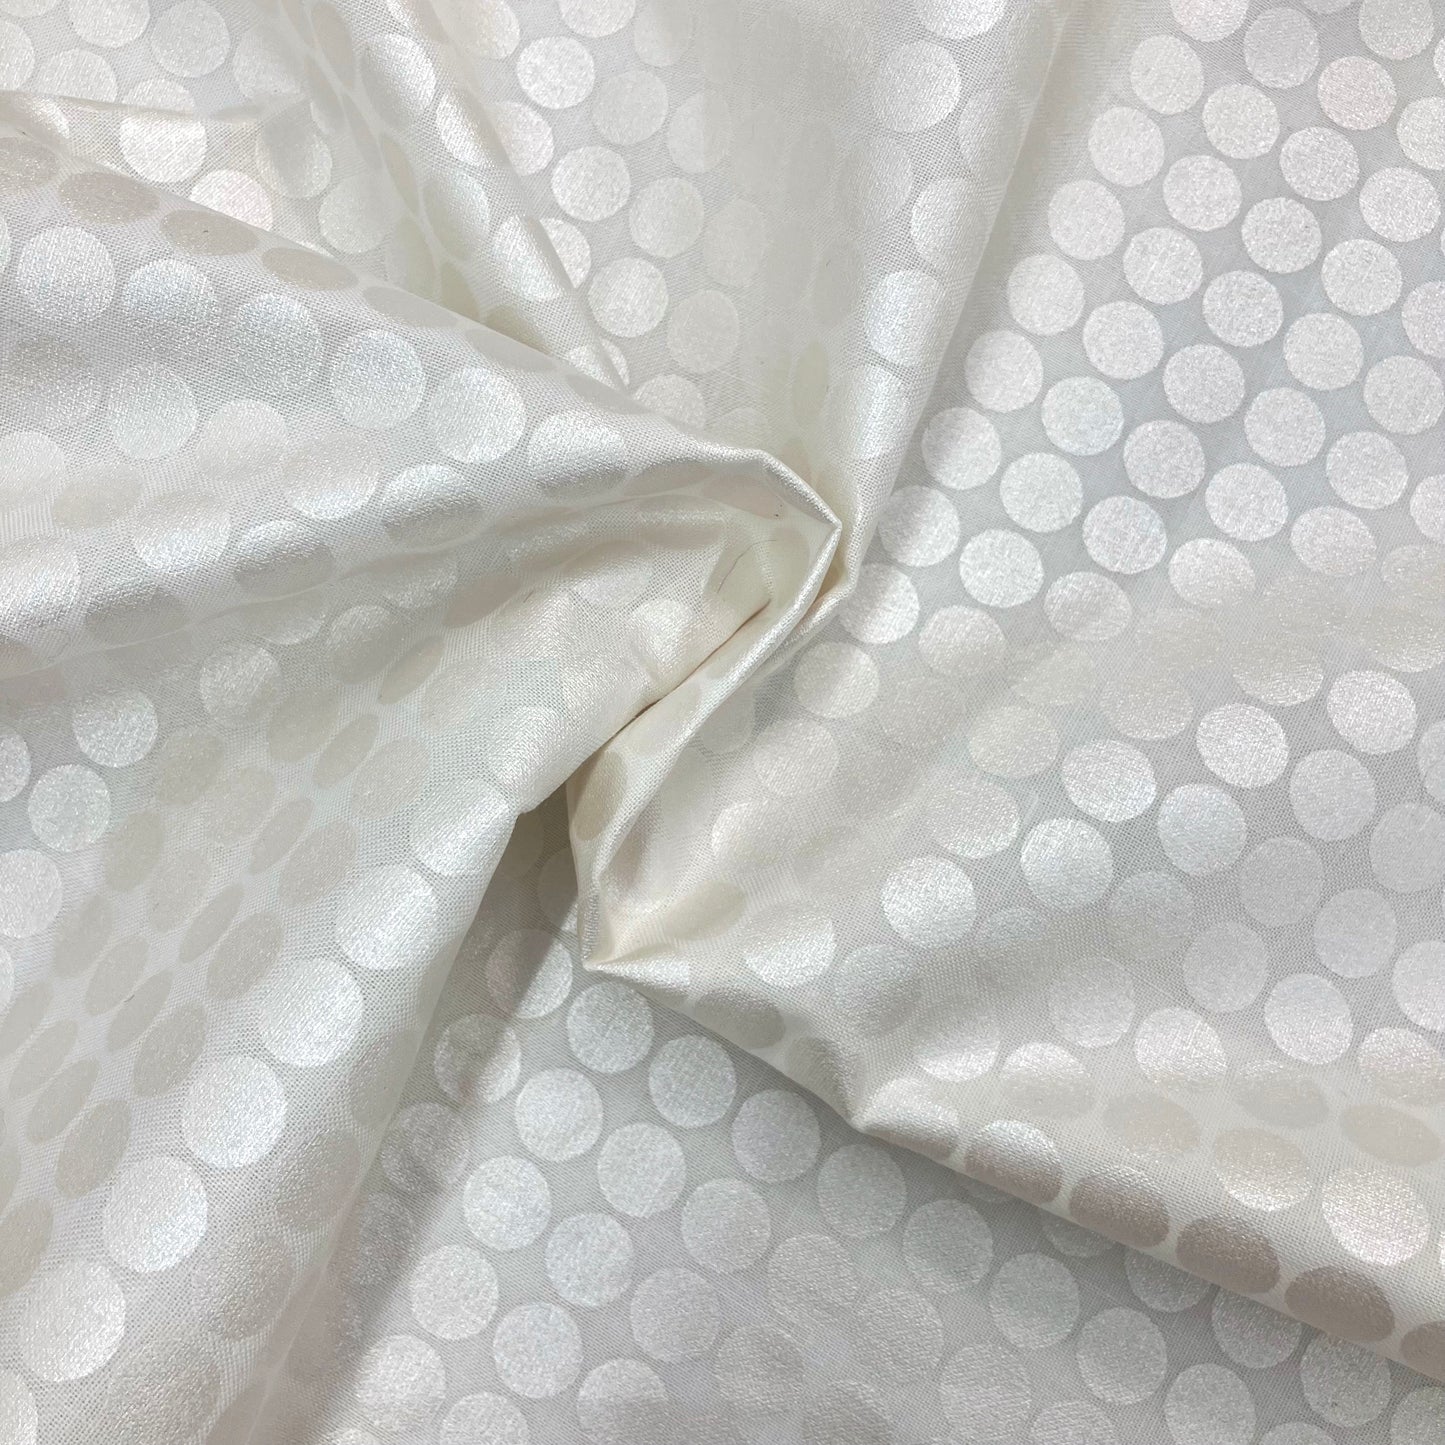 Pearly Cotton - 3 yards